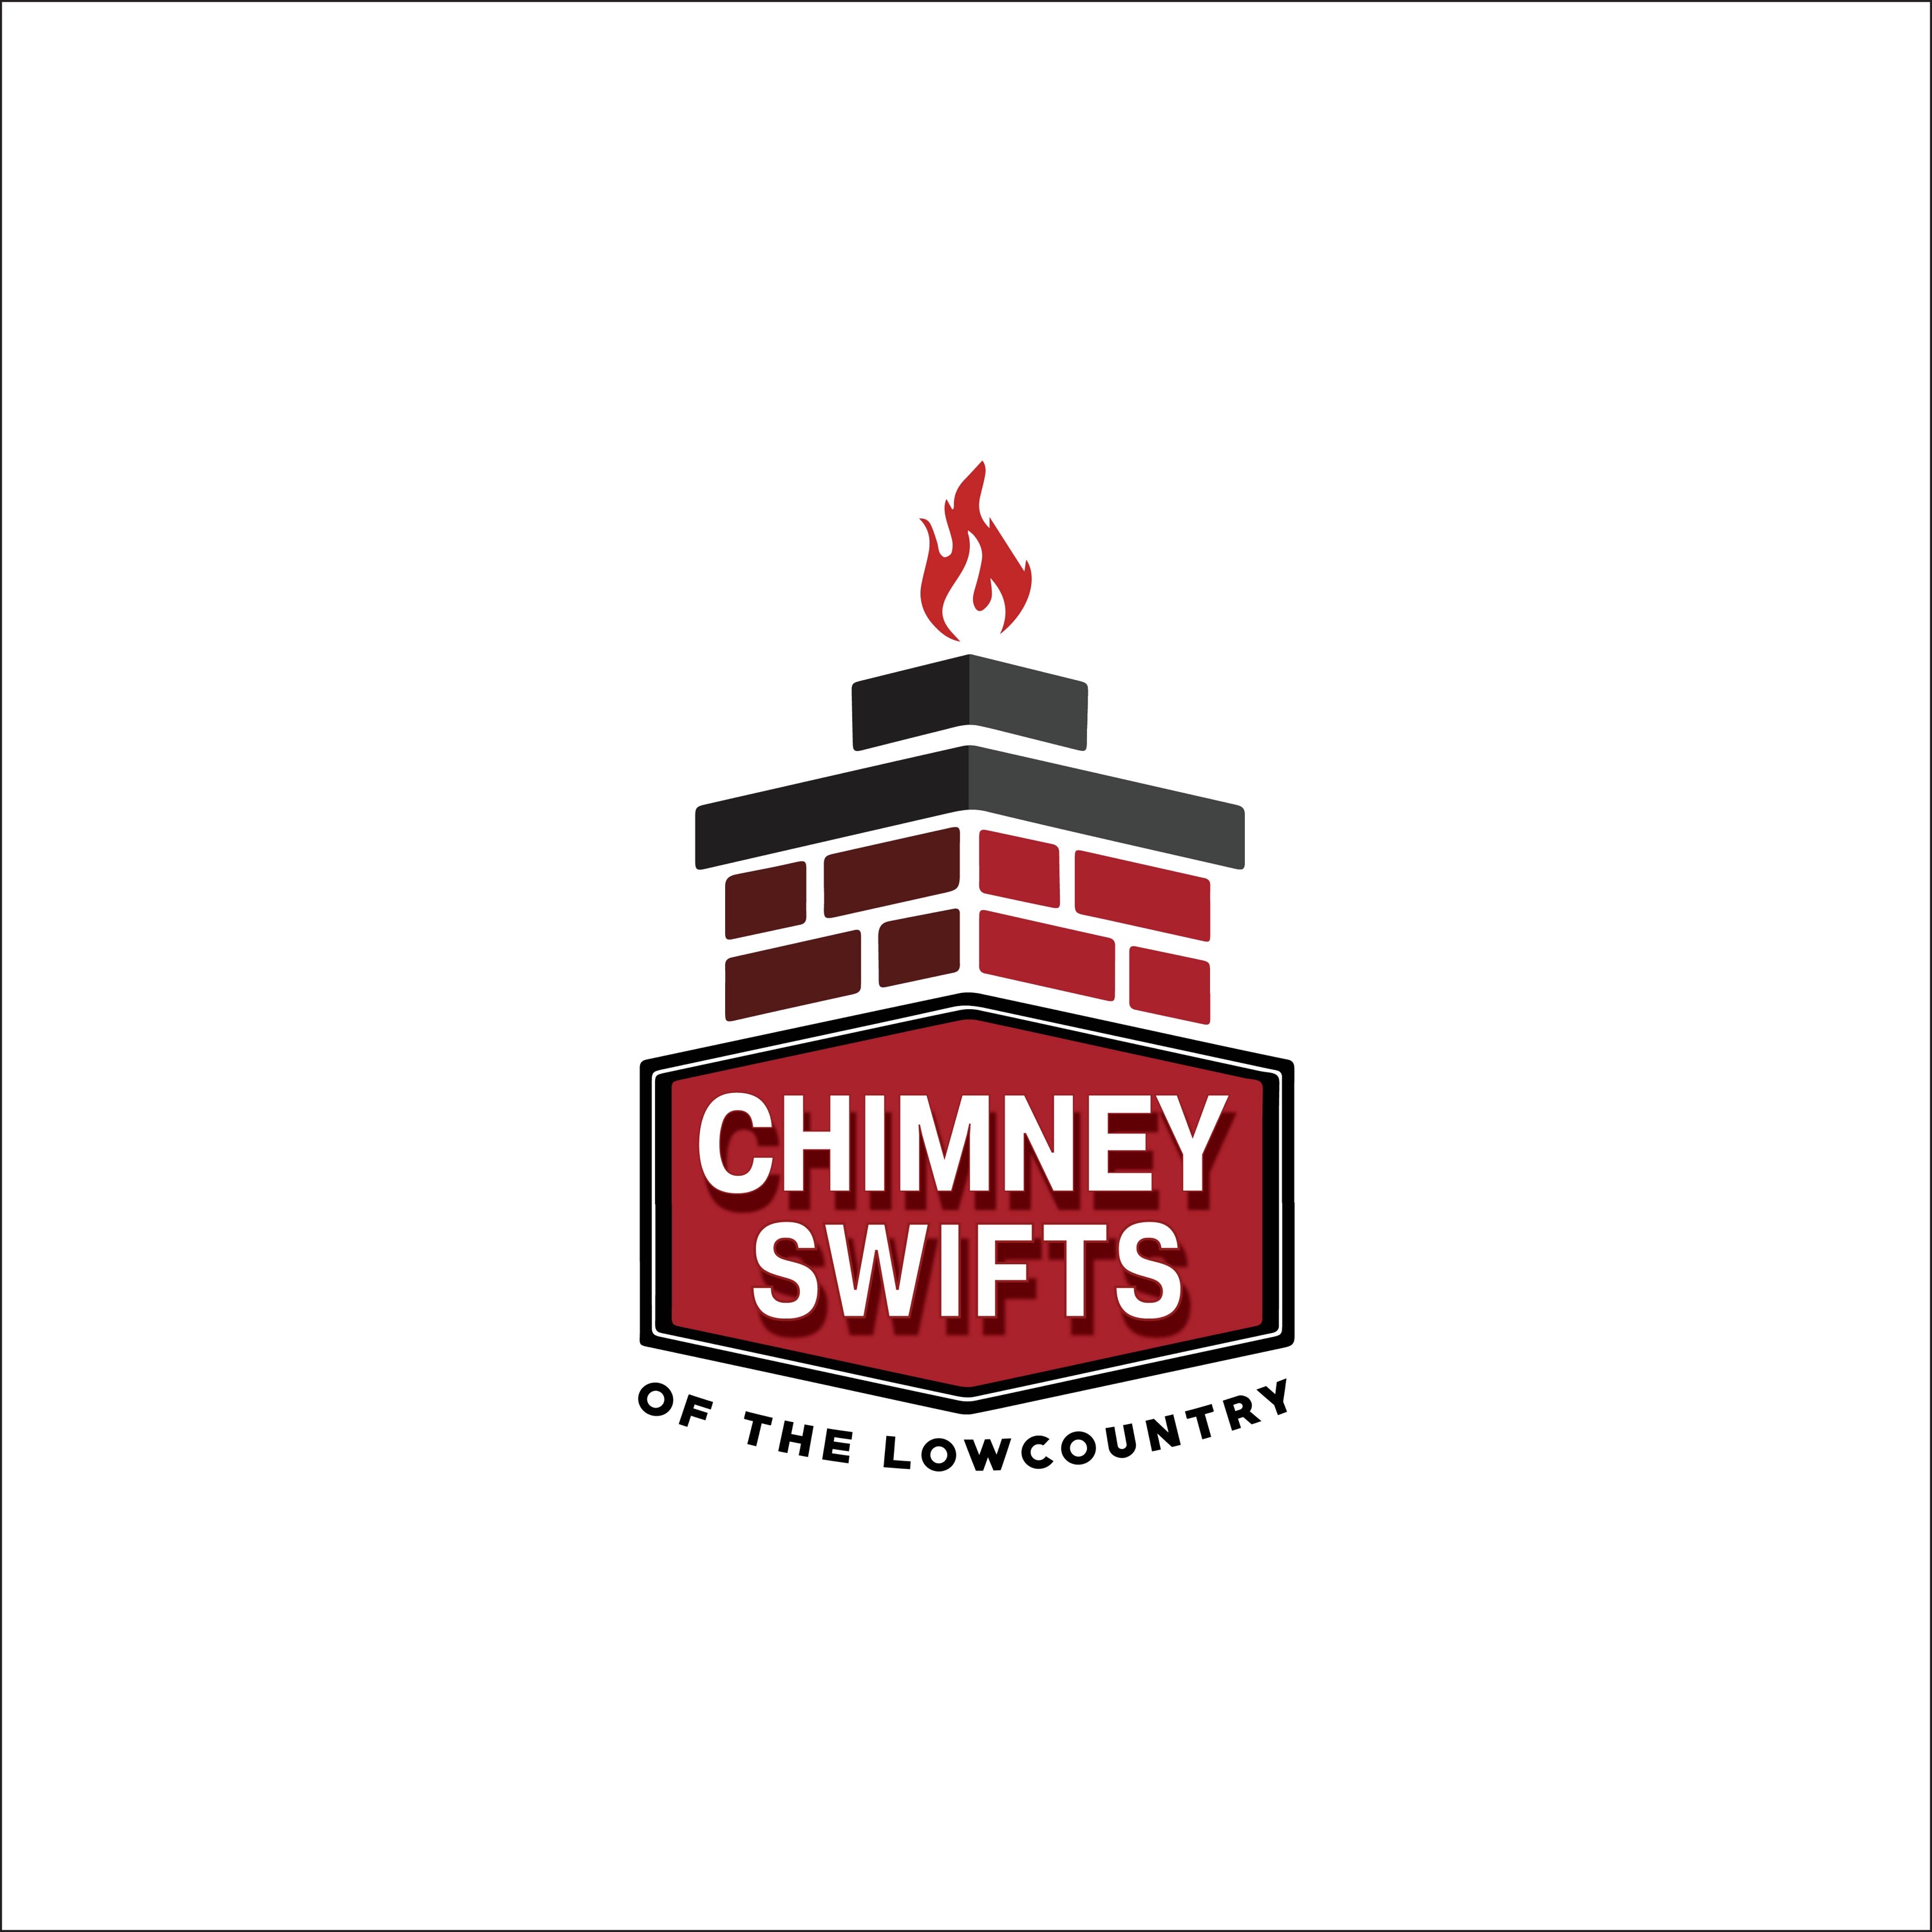 Chimney Swifts of The Lowcountry Logo